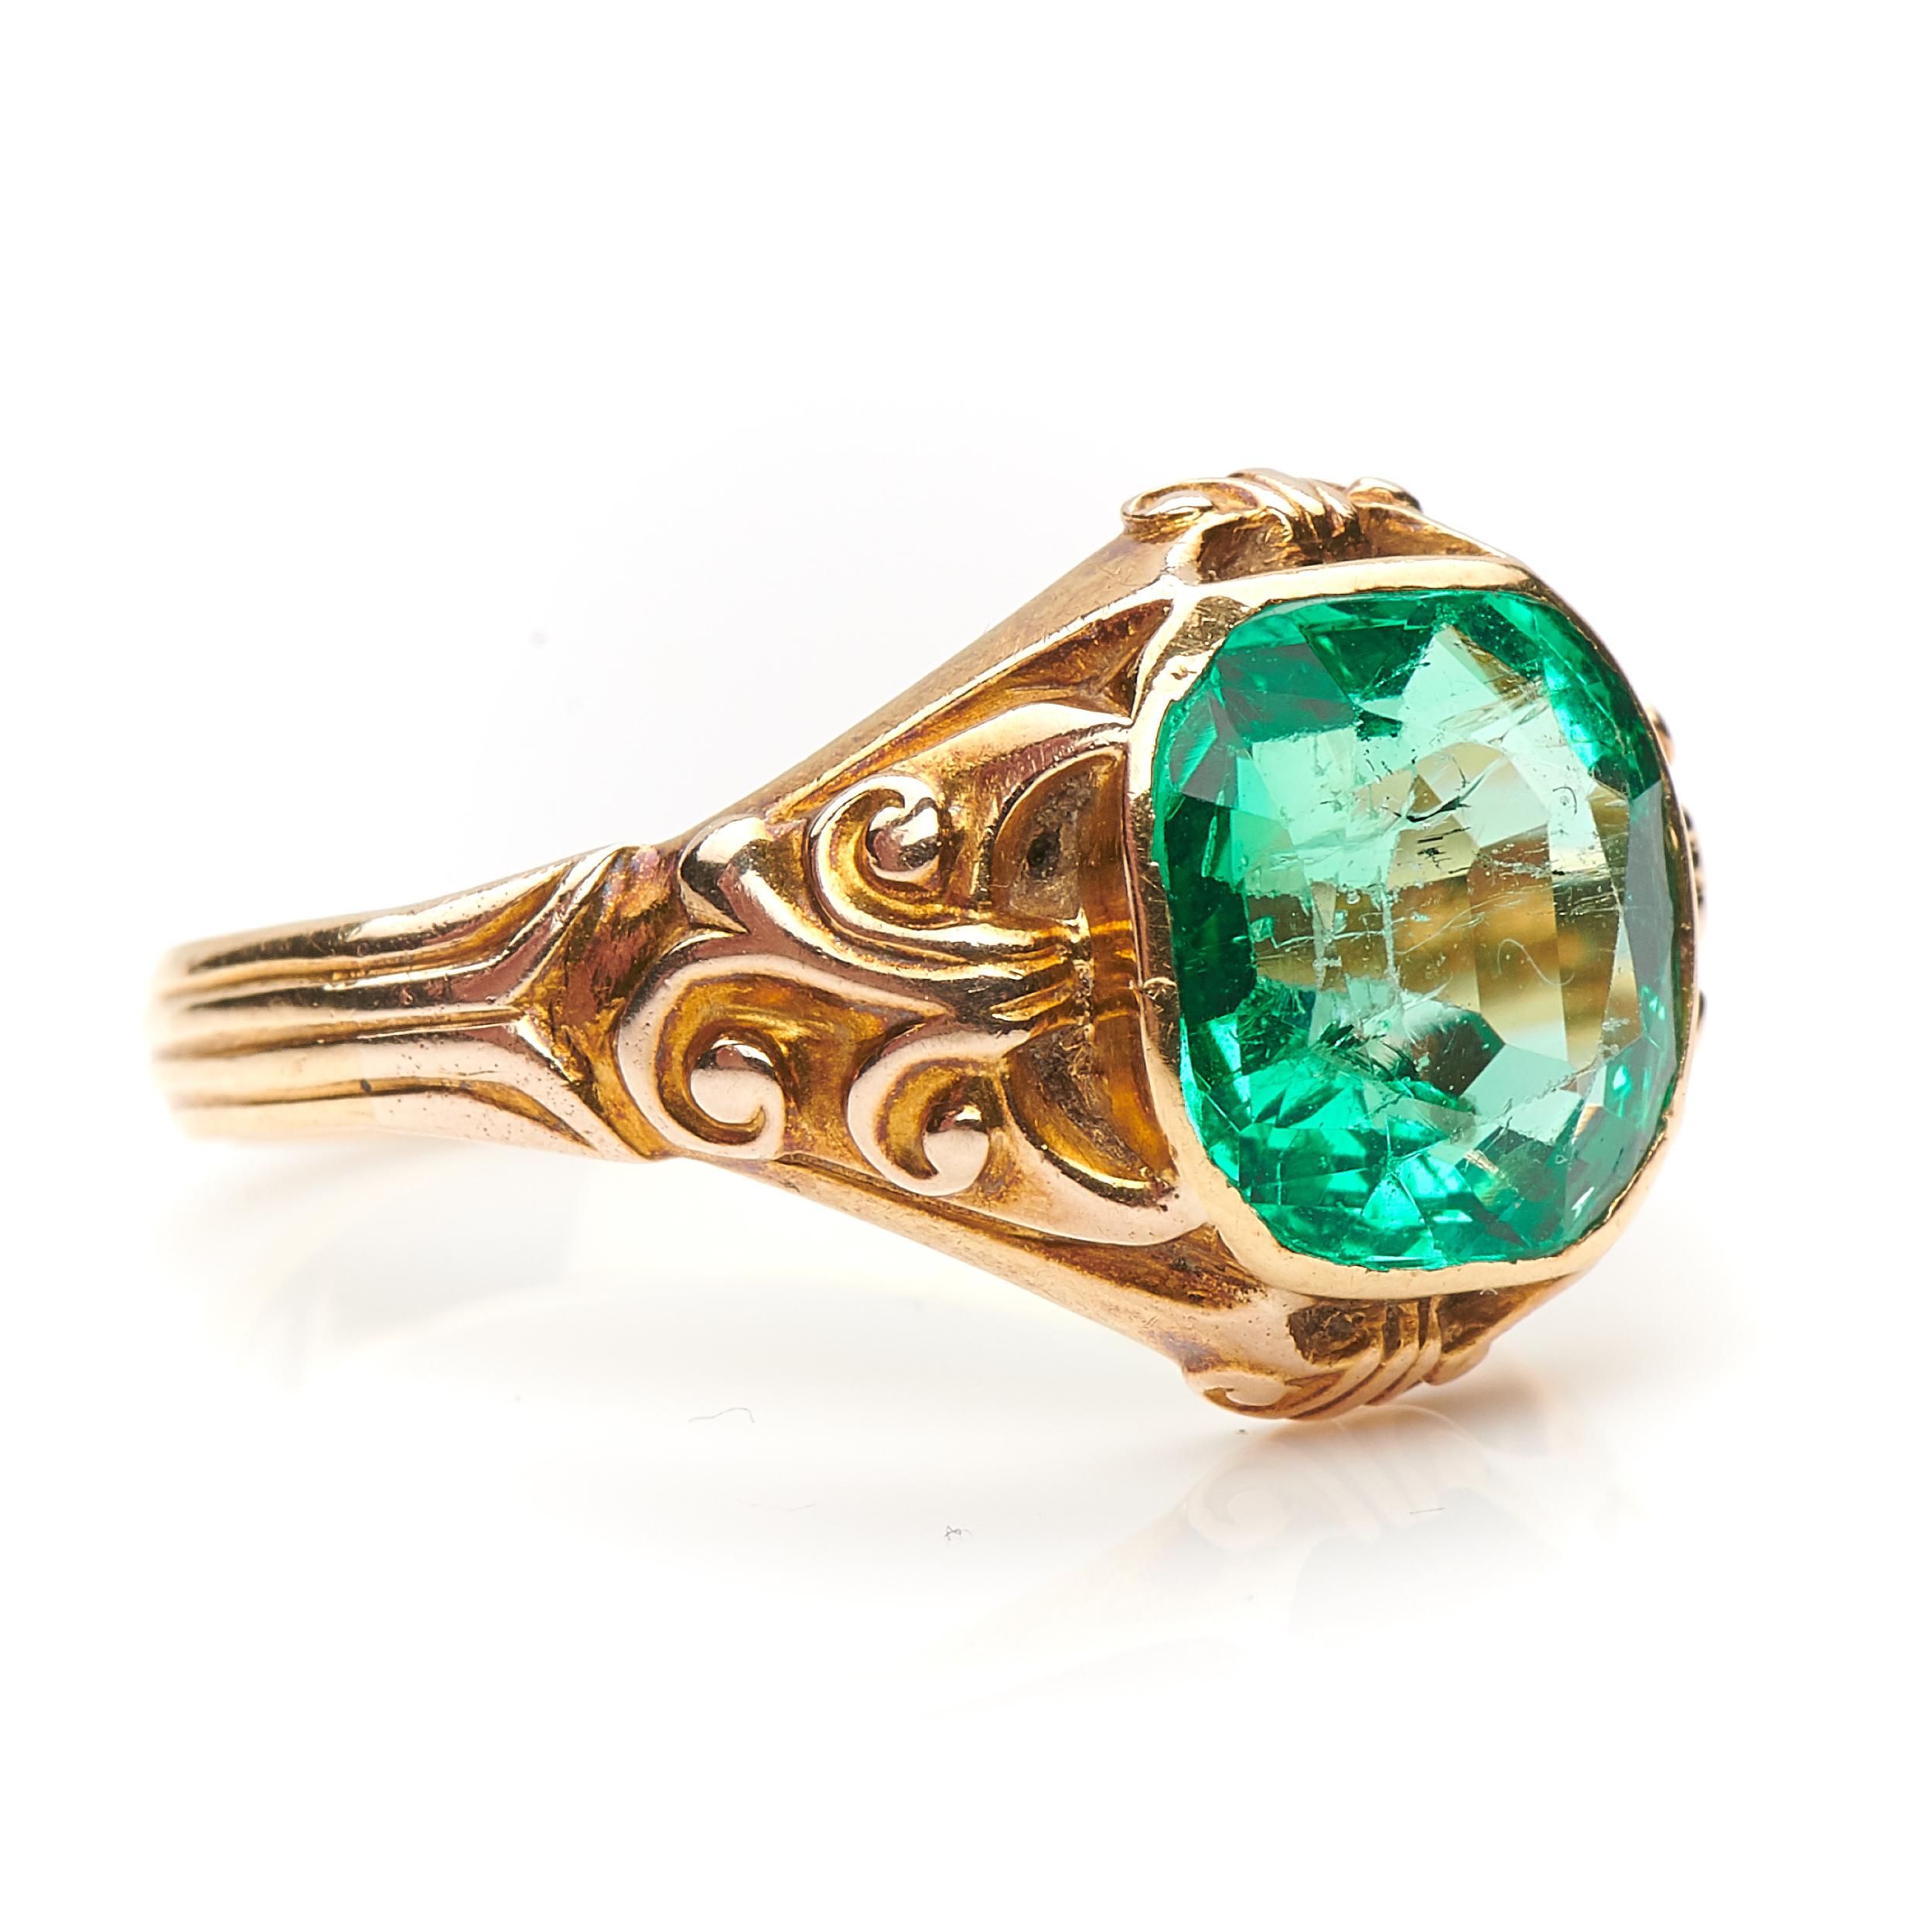 Victorian, single emerald ring, circa 1880. A fabulous vibrant green certified Colombian 3ct emerald set in heavy beautifully carved gold shoulders. The emerald is fairly clear which is rare given the size and nature of this stone. The best emeralds